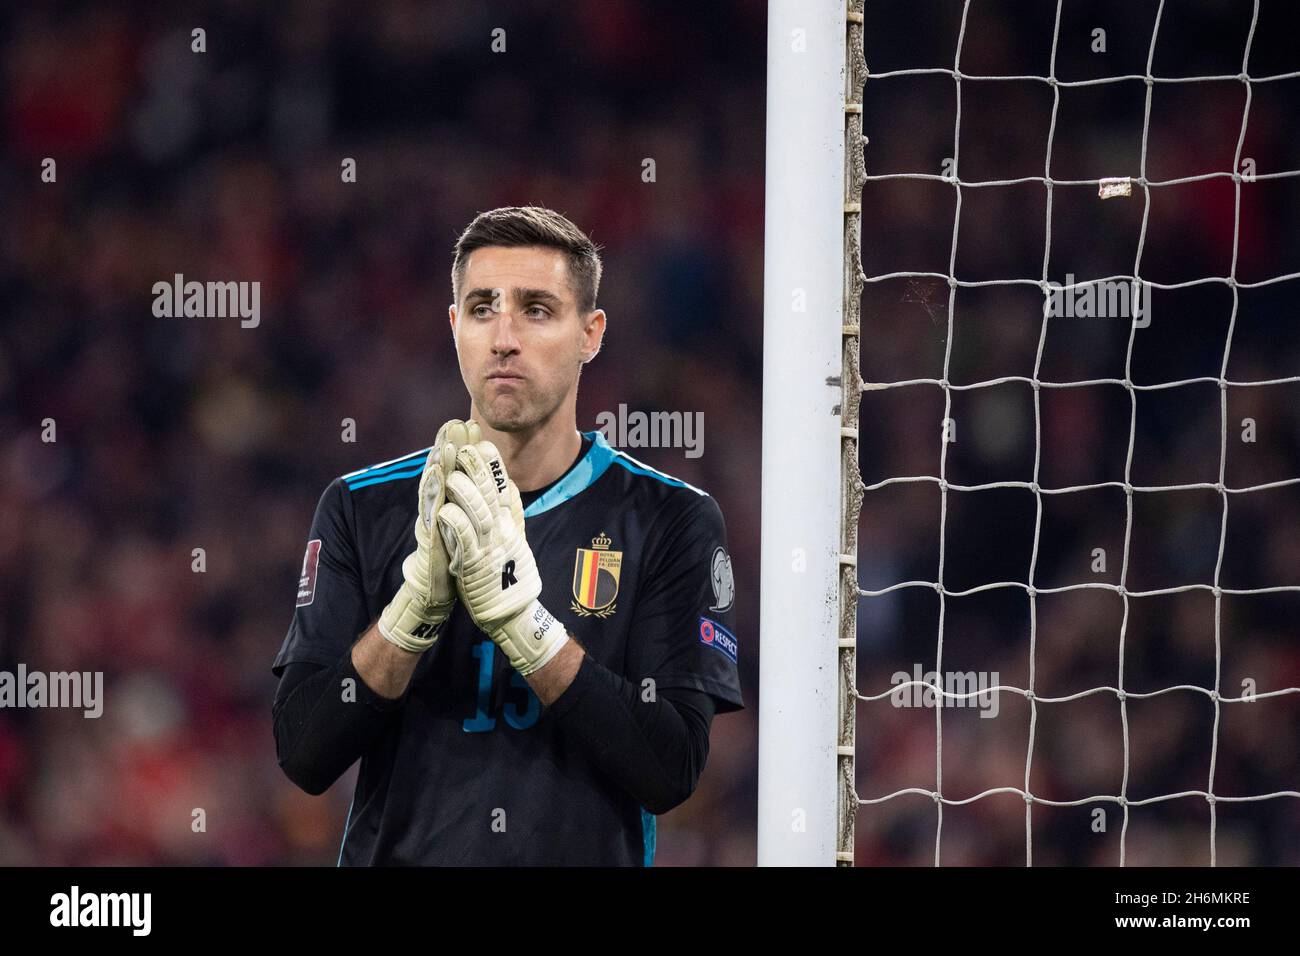 Cardiff, Wales, UK. 16th Nov, 2021. Koen Casteels of Belgium during the World Cup 2022 group qualification match between Wales and Belgium at the Cardiff City Stadium. Credit: Mark Hawkins/Alamy Live News Stock Photo